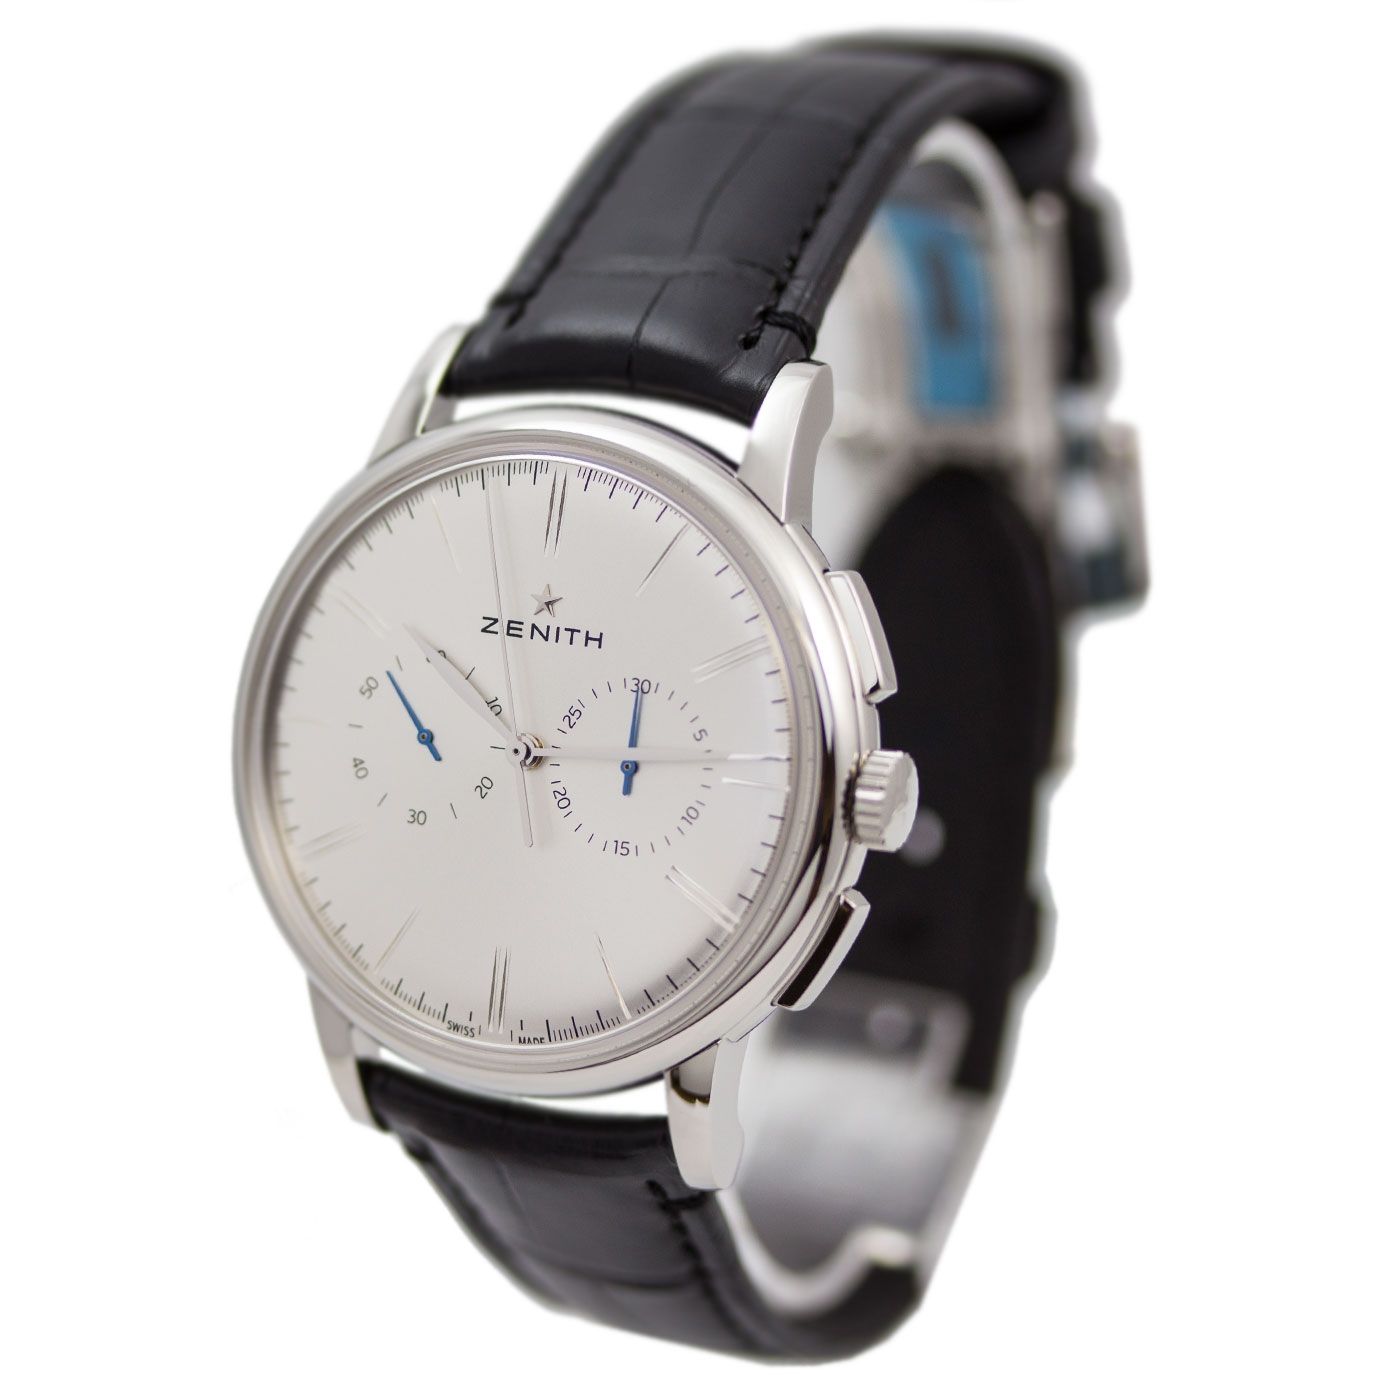 The black strap fake watch is designed for men.